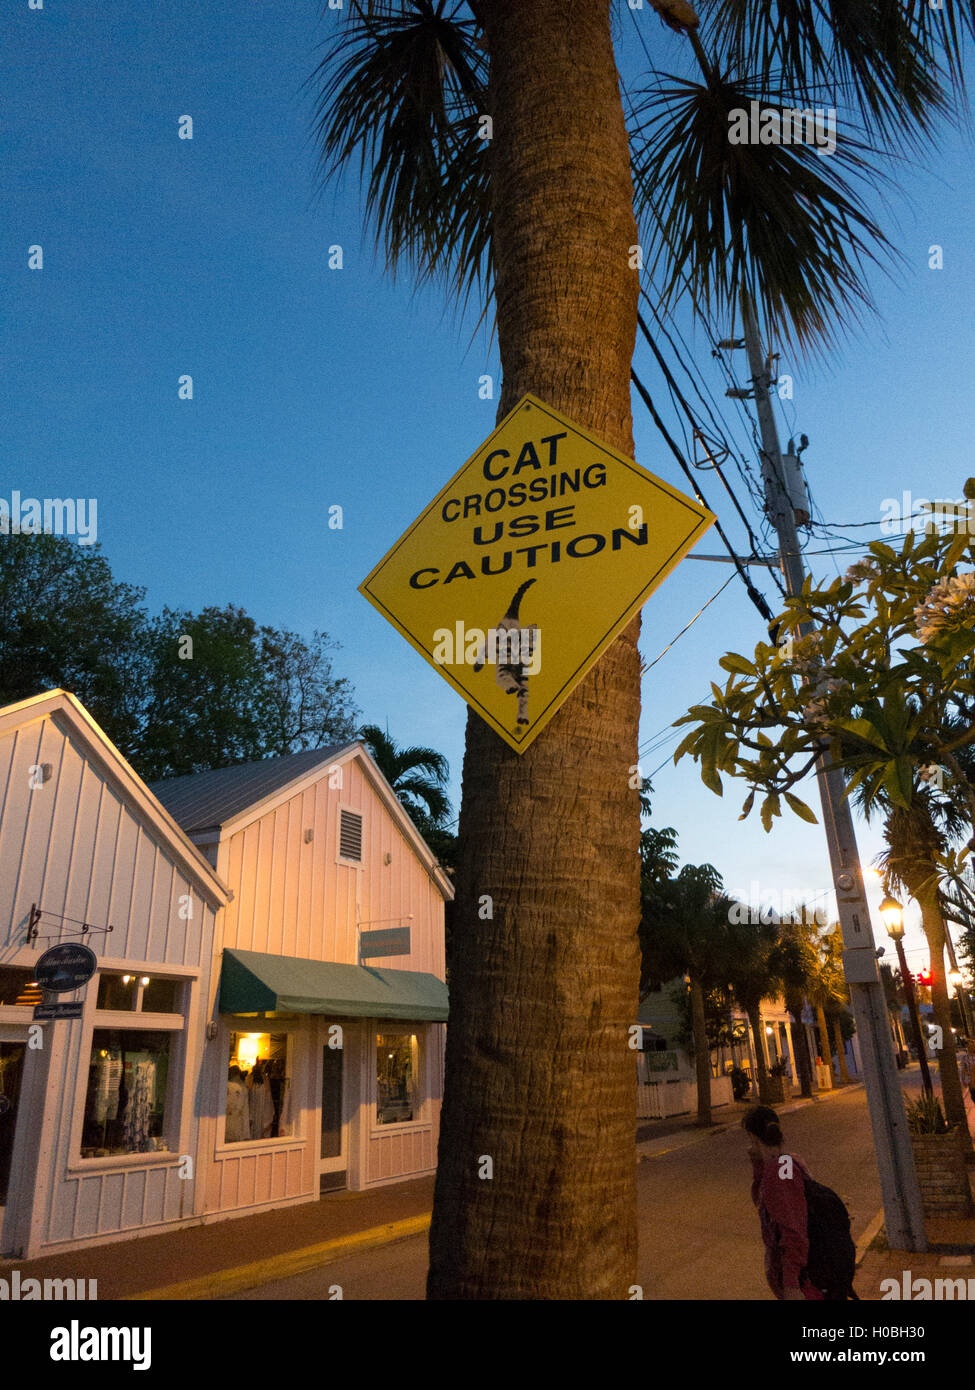 Street sign in Bahama Village, Key West, warning motorist about cats crossing the street Stock Photo